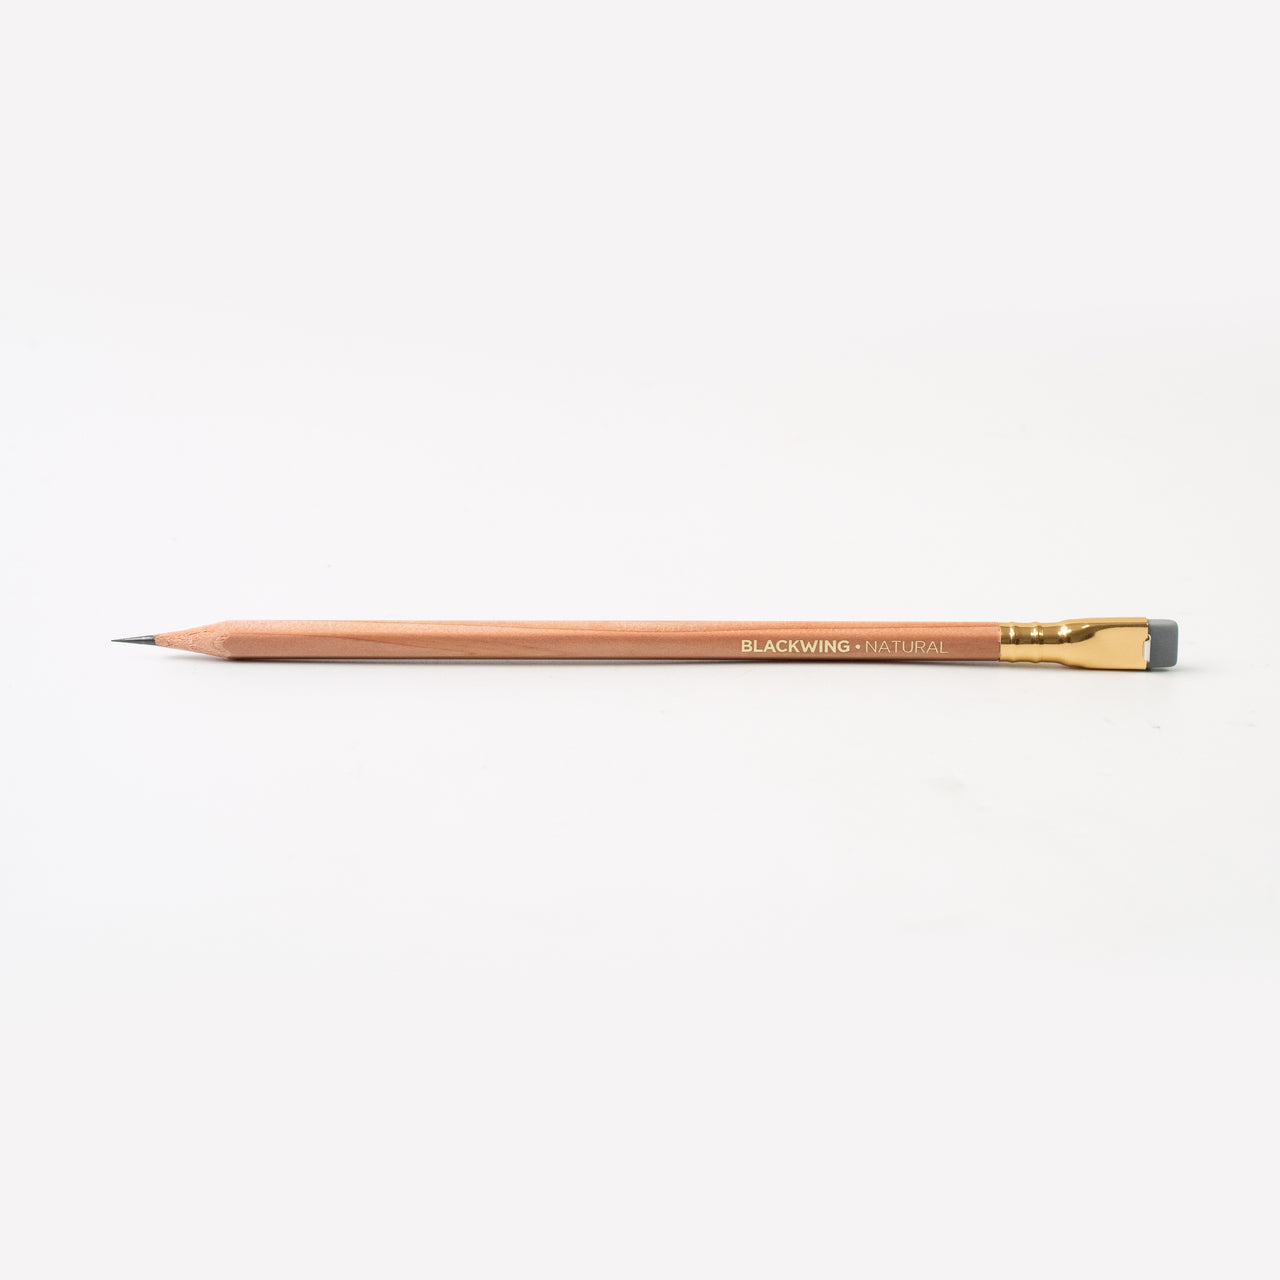 The Blackwing Natural features a gold imprint, grey eraser and the iconic square 